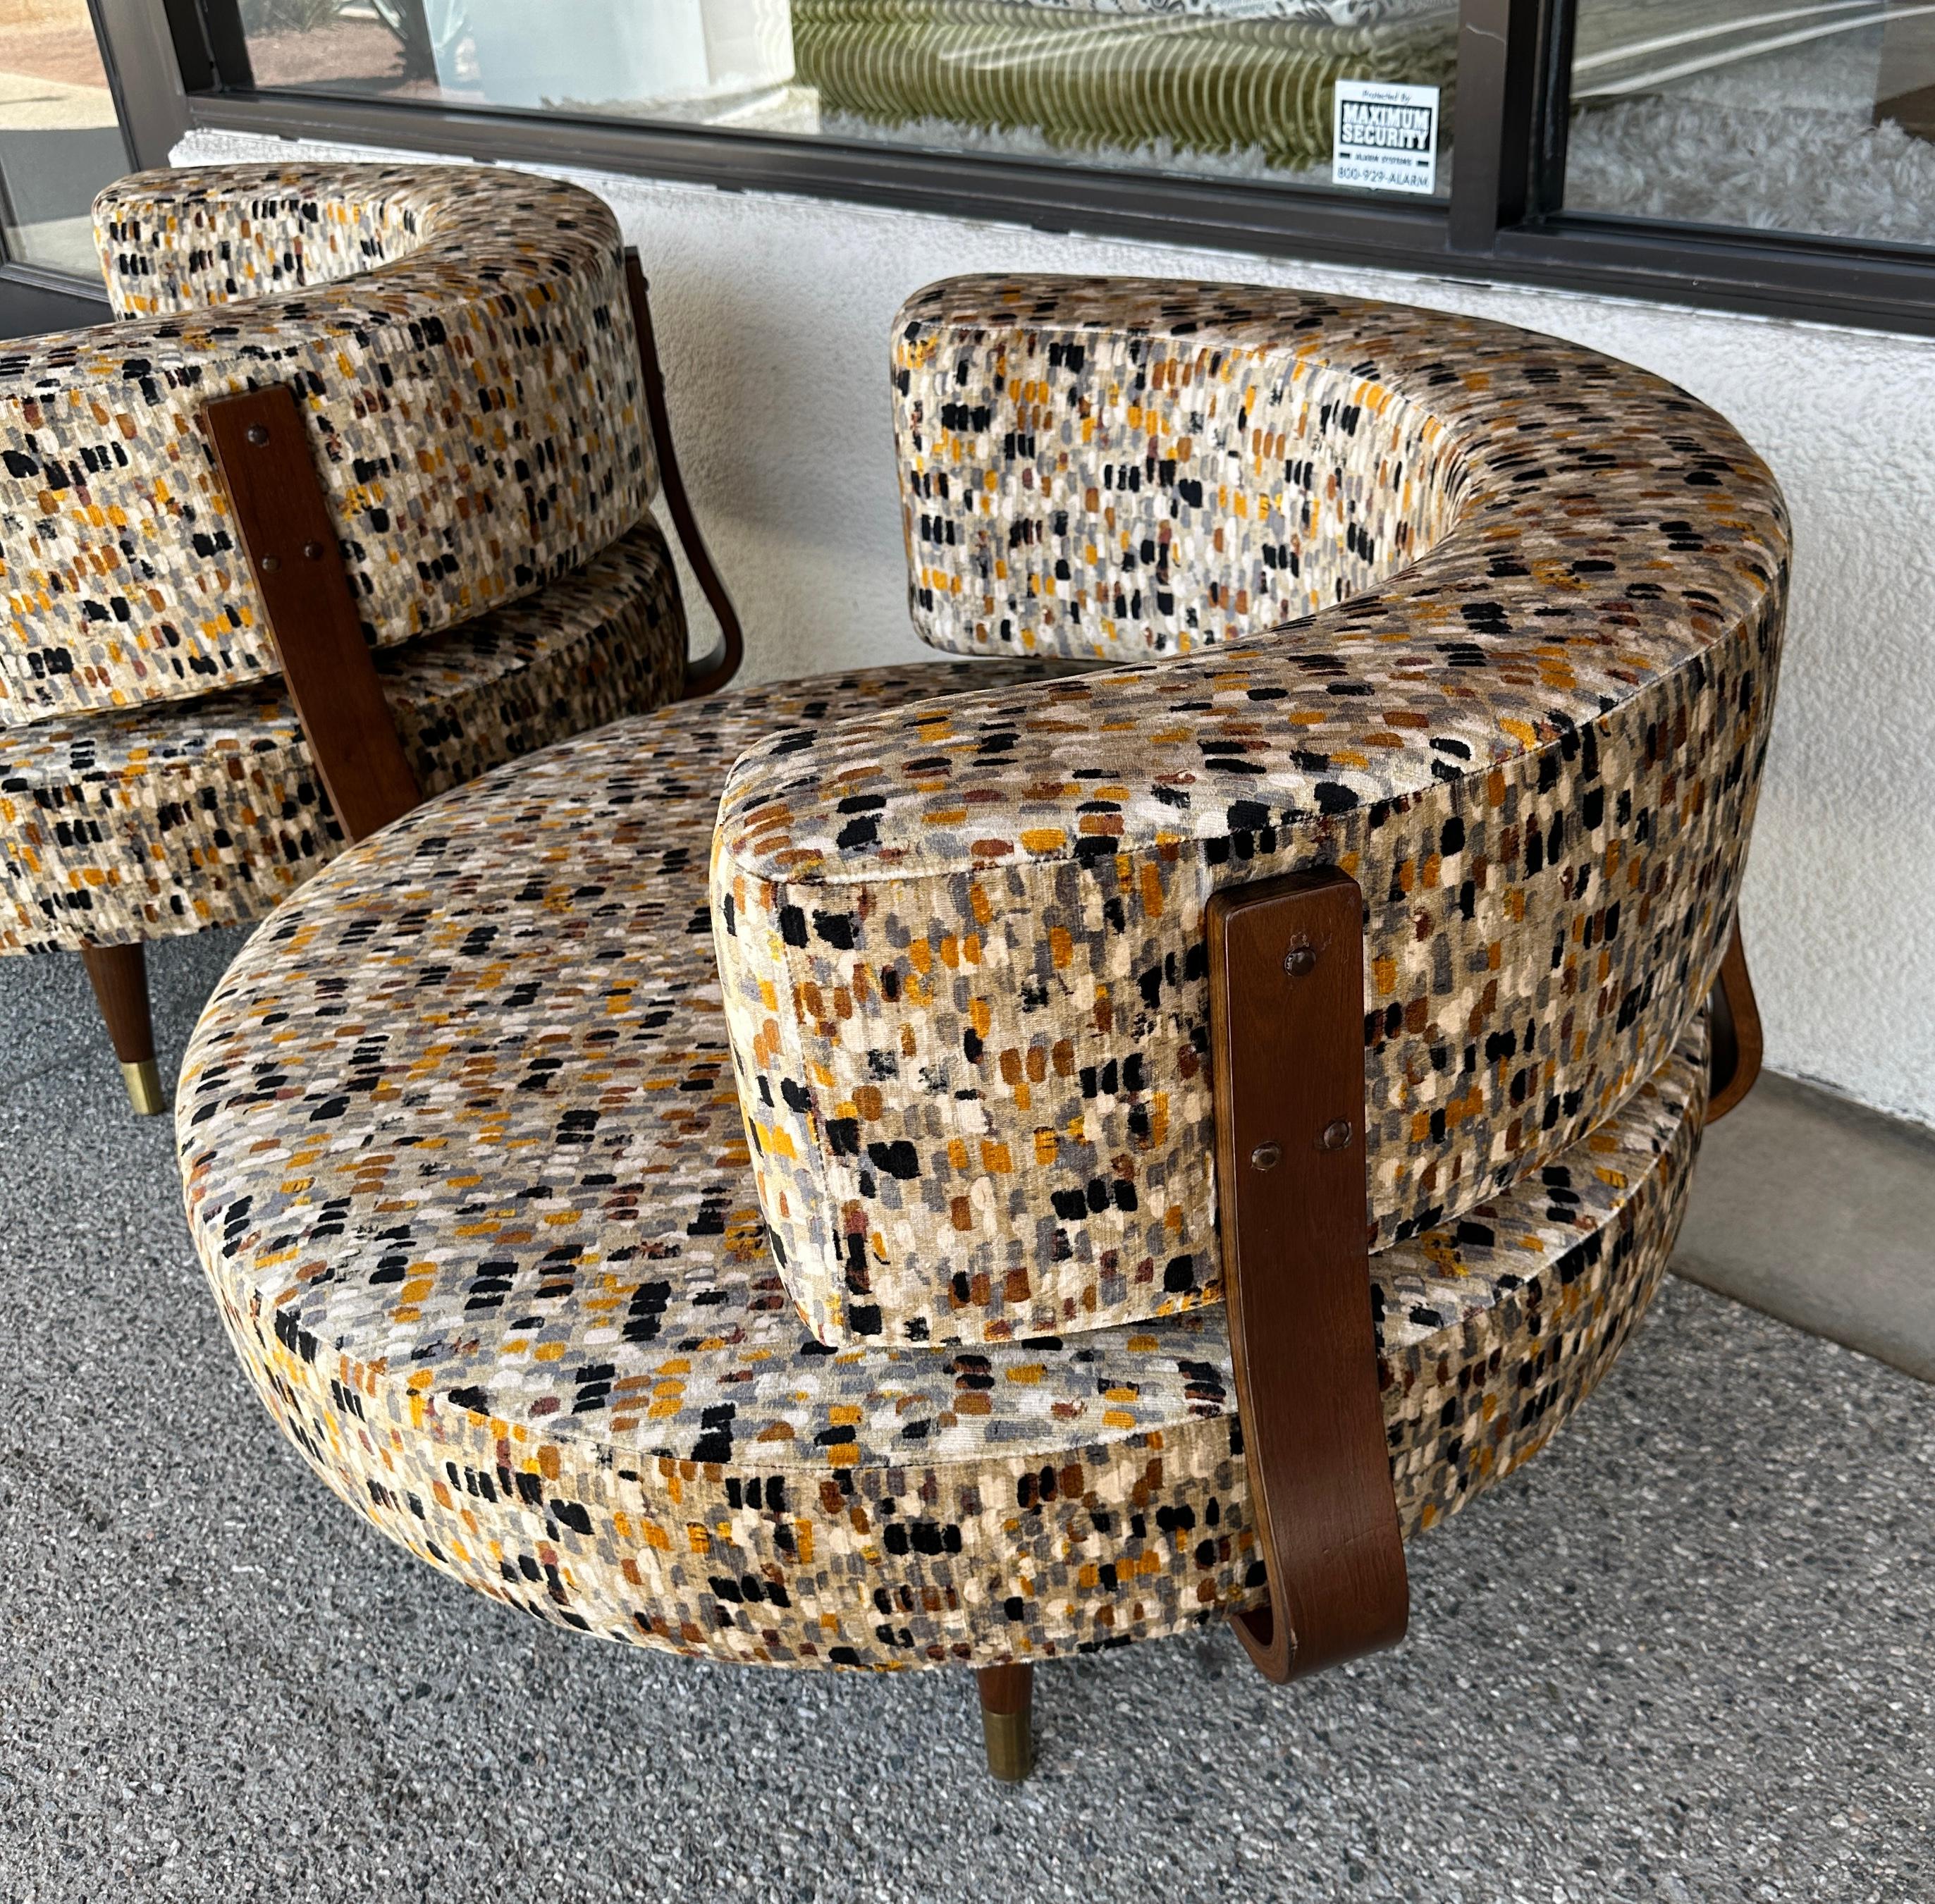 A fabulous pair of Adrian Pearsall large oversized round swivel chairs redone in a beautiful printed cotton velvet fabric by Romo called Murano Anise. It s a cotton/viscose blend. The chairs swivel completely. There is a back cushion for each in the